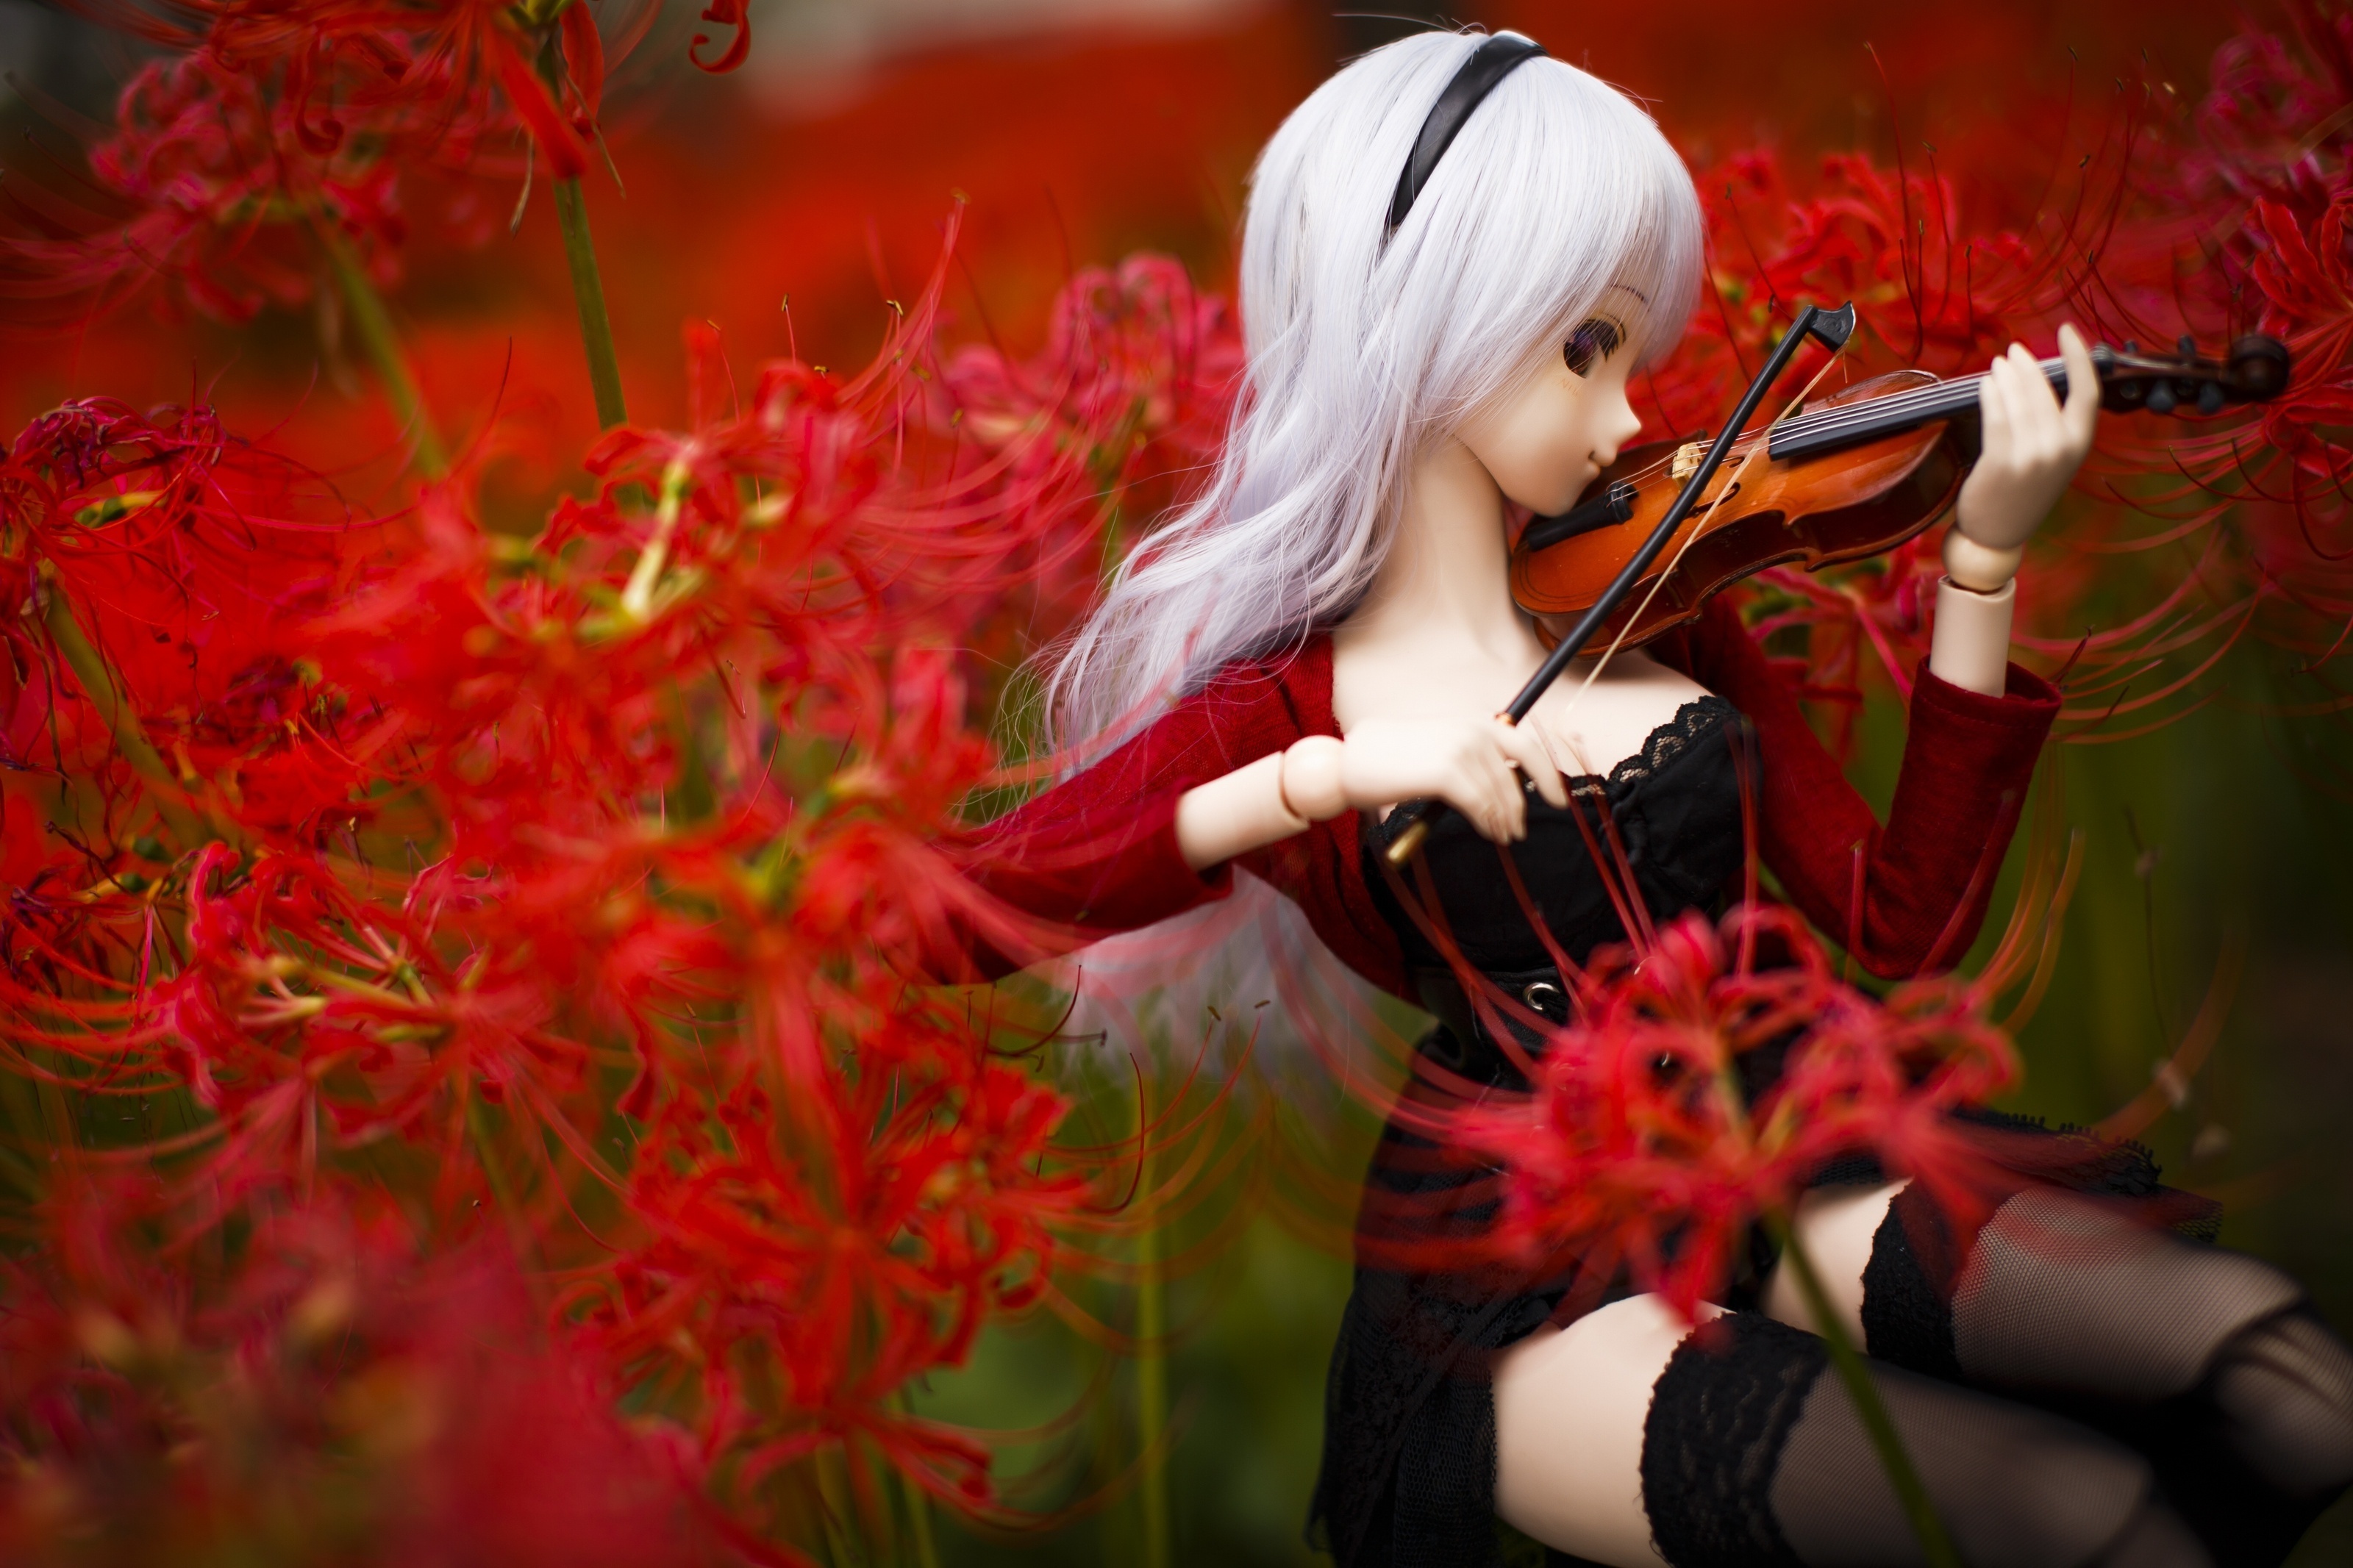 Wallpaper | 3D wallpapers | photo | picture | Doll, flowers, violin